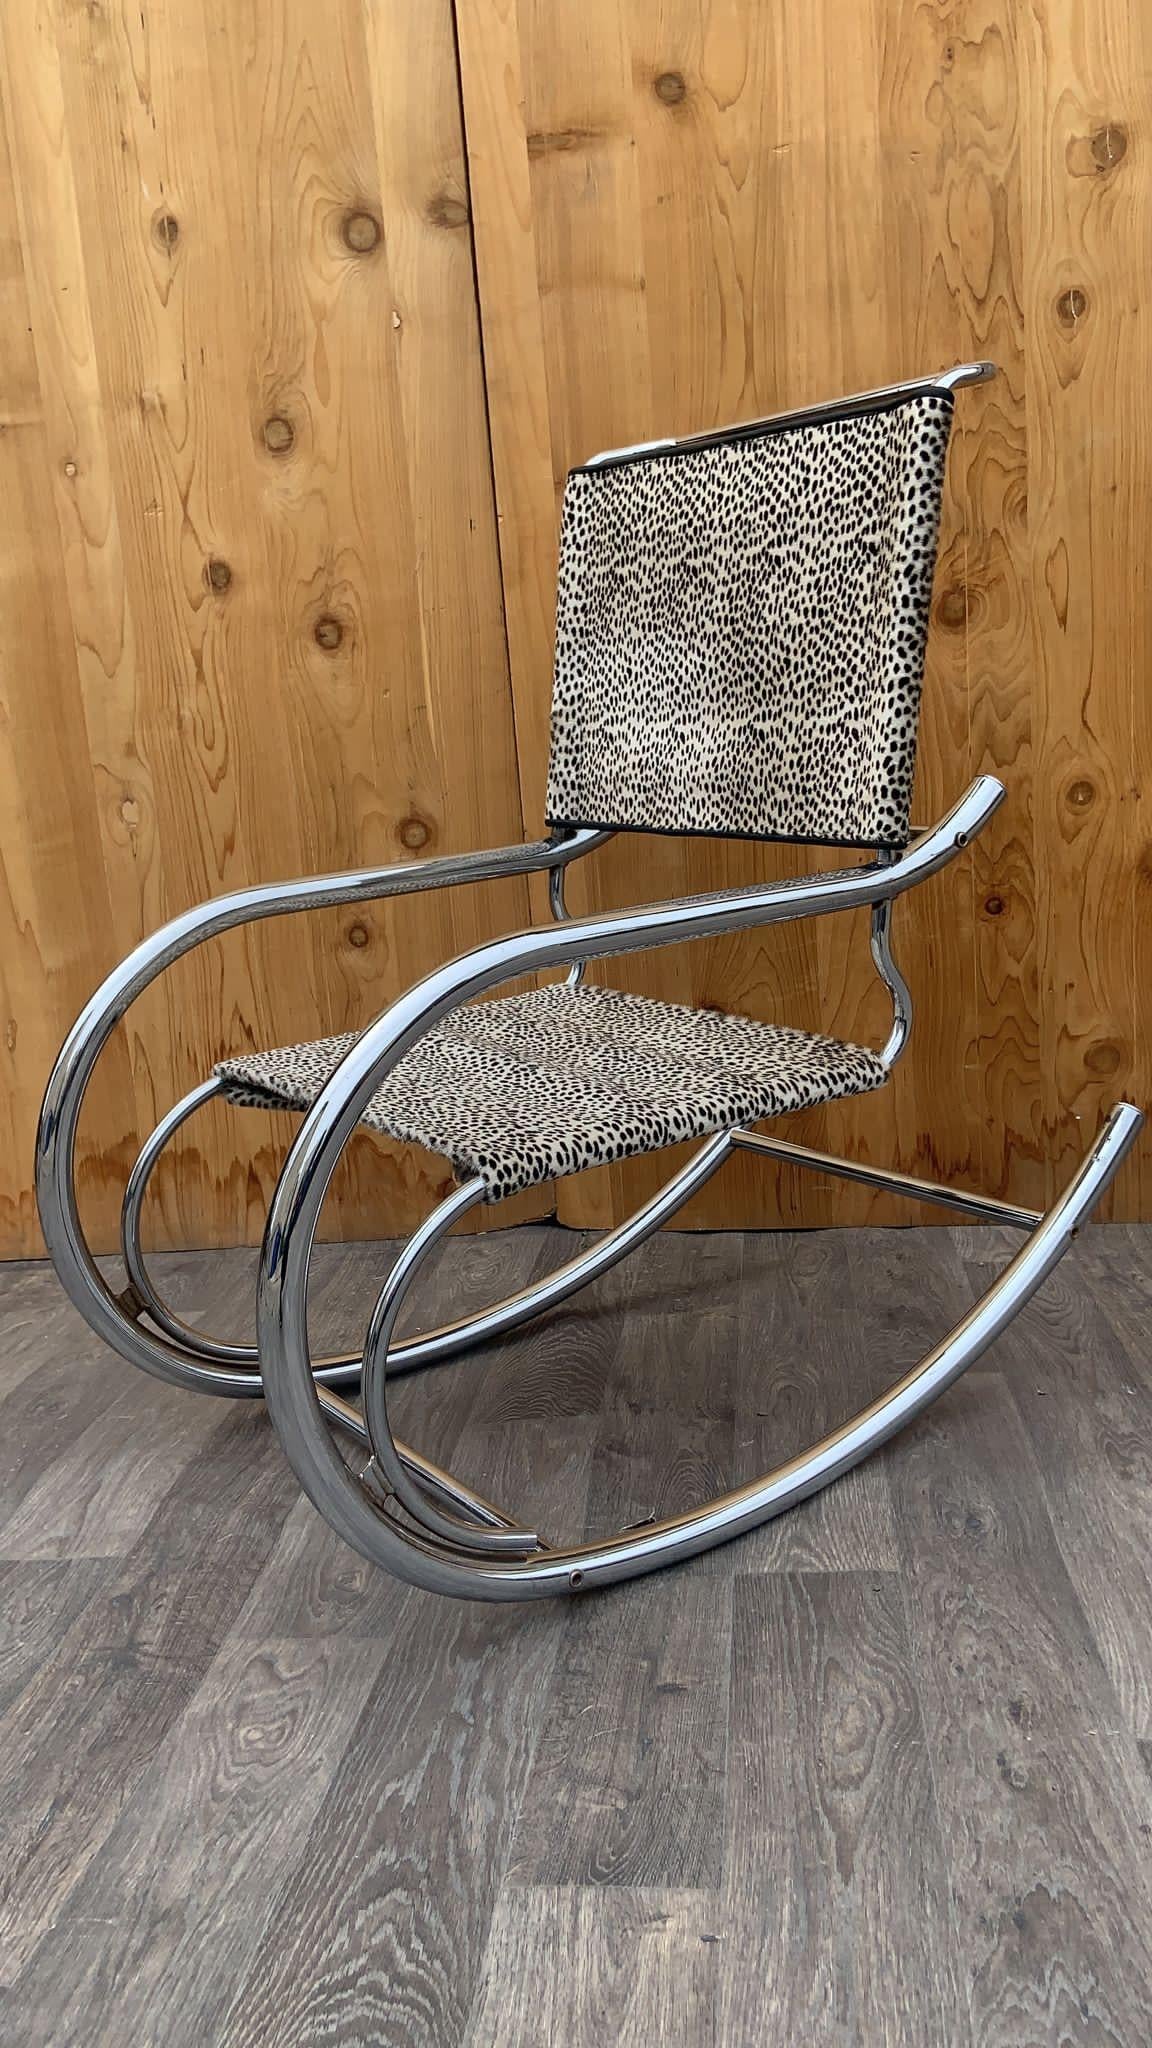 Mid Century Modern Mies Van Der Rohe Style Fasem Bauhaus Chrome Sling Rocker Newly Upholstered in Cheetah Print Hair-on Cowhide

The Mid Century Modern Mies Van Der Rohe Style Fasem Bauhaus Chrome Sling Rocker, newly upholstered in Cheetah Print